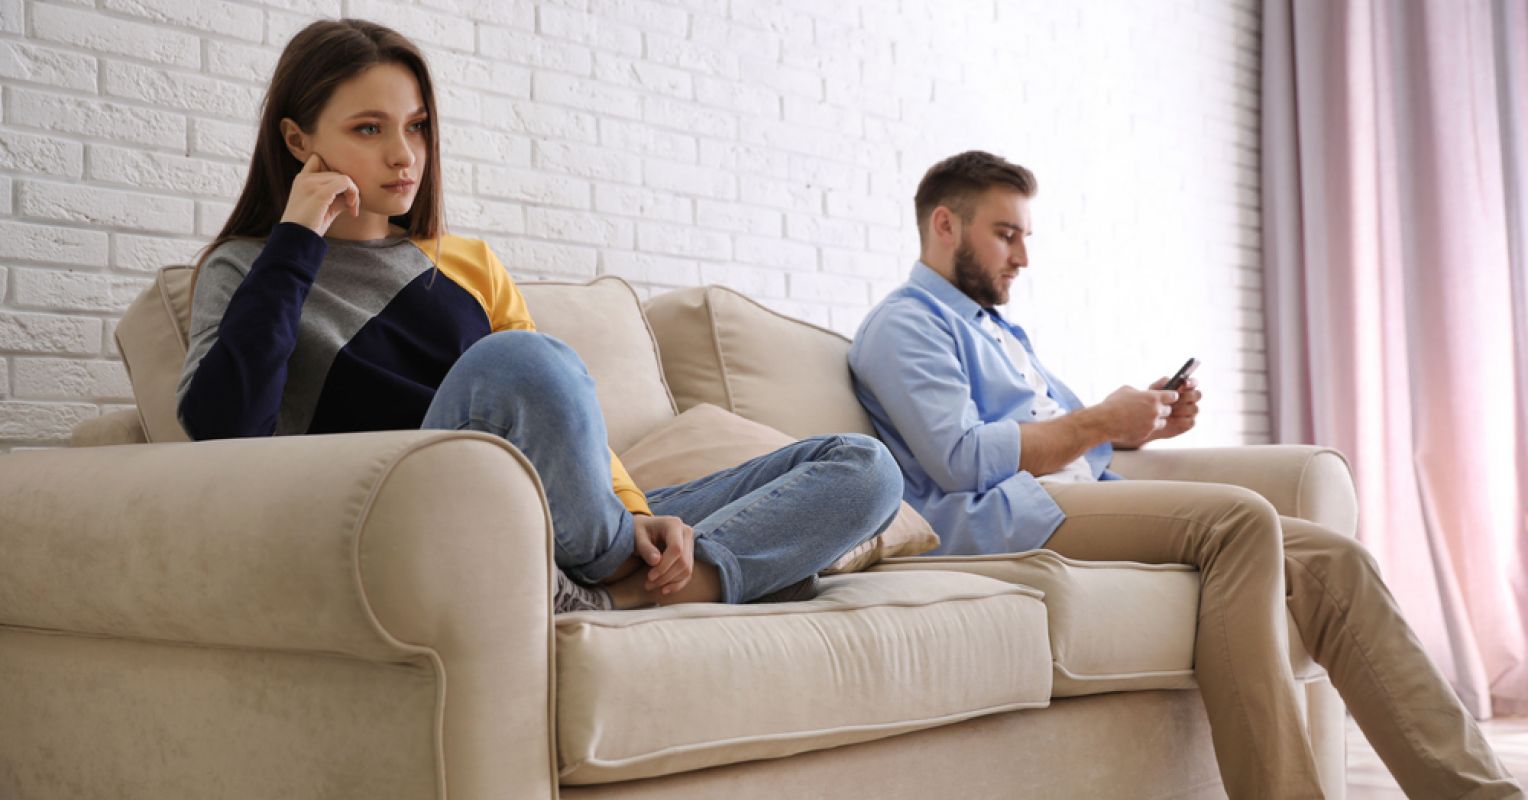 Am I on My Phone to Avoid Conflict With My Partner? - Psychology Today